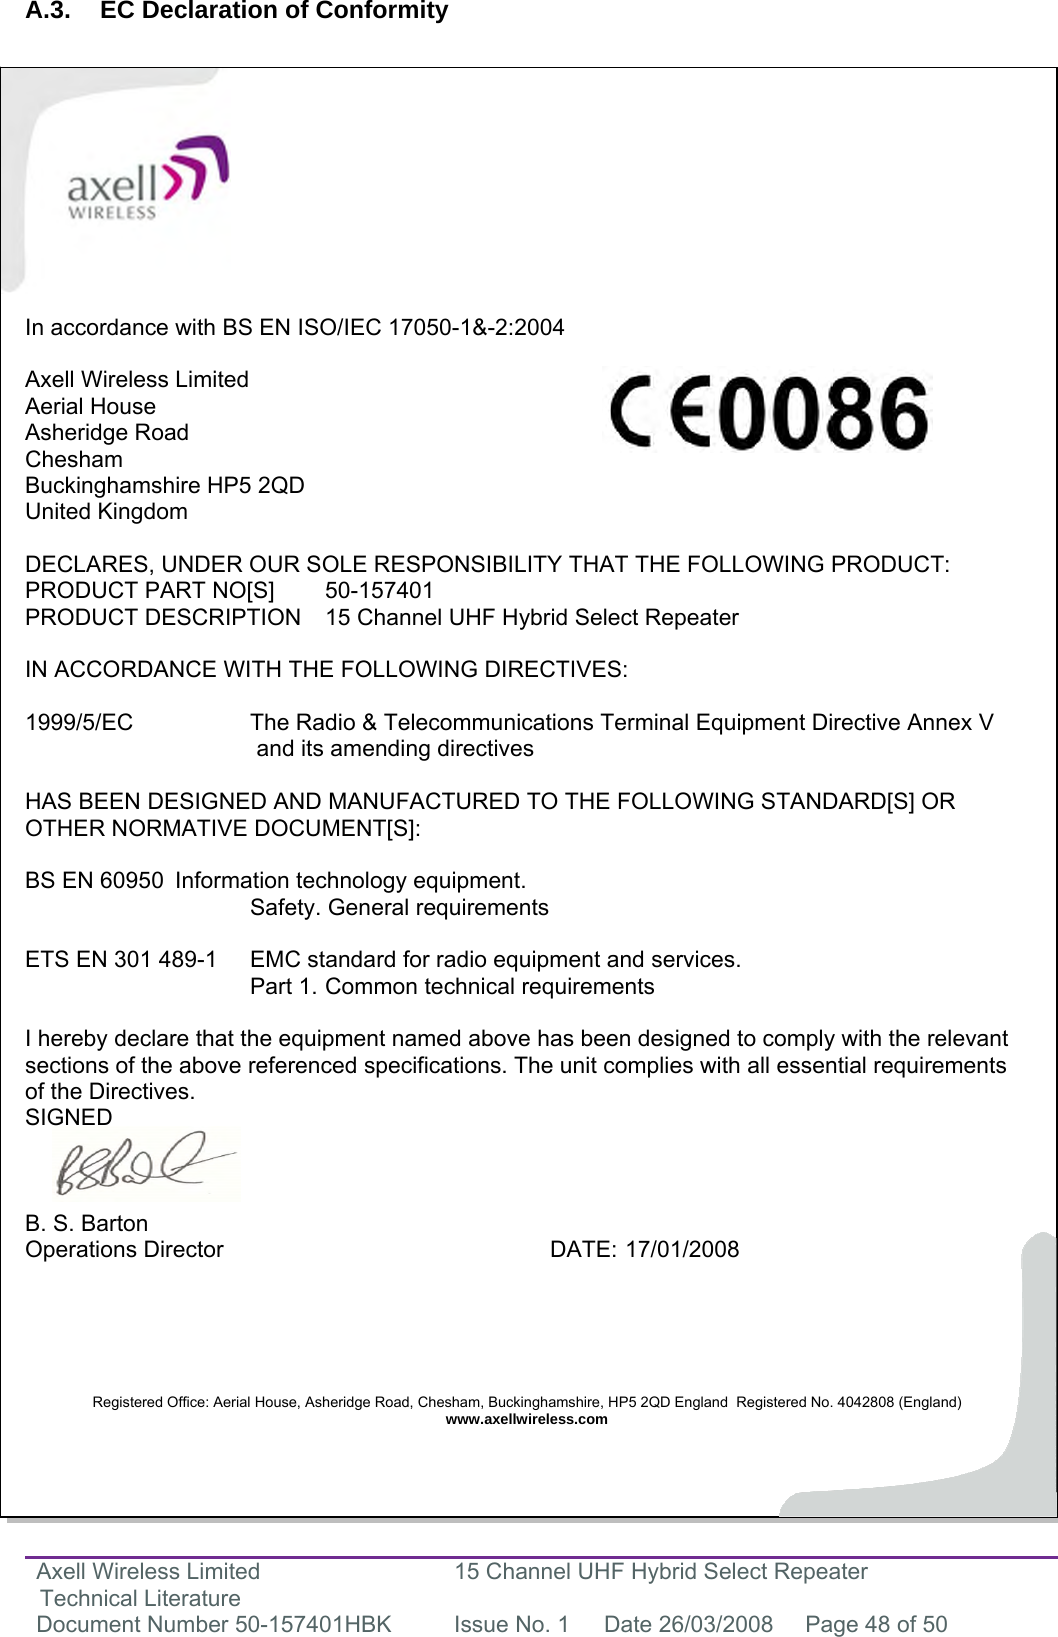 Axell Wireless Limited Technical Literature 15 Channel UHF Hybrid Select Repeater Document Number 50-157401HBK  Issue No. 1  Date 26/03/2008  Page 48 of 50   A.3.  EC Declaration of Conformity            In accordance with BS EN ISO/IEC 17050-1&amp;-2:2004  Axell Wireless Limited Aerial House Asheridge Road Chesham Buckinghamshire HP5 2QD United Kingdom  DECLARES, UNDER OUR SOLE RESPONSIBILITY THAT THE FOLLOWING PRODUCT: PRODUCT PART NO[S]  50-157401 PRODUCT DESCRIPTION  15 Channel UHF Hybrid Select Repeater  IN ACCORDANCE WITH THE FOLLOWING DIRECTIVES:  1999/5/EC    The Radio &amp; Telecommunications Terminal Equipment Directive Annex V        and its amending directives  HAS BEEN DESIGNED AND MANUFACTURED TO THE FOLLOWING STANDARD[S] OR OTHER NORMATIVE DOCUMENT[S]:  BS EN 60950  Information technology equipment.     Safety. General requirements   ETS EN 301 489-1  EMC standard for radio equipment and services.        Part 1.  Common technical requirements  I hereby declare that the equipment named above has been designed to comply with the relevant sections of the above referenced specifications. The unit complies with all essential requirements of the Directives. SIGNED    B. S. Barton Operations Director     DATE: 17/01/2008      Registered Office: Aerial House, Asheridge Road, Chesham, Buckinghamshire, HP5 2QD England  Registered No. 4042808 (England) www.axellwireless.com      